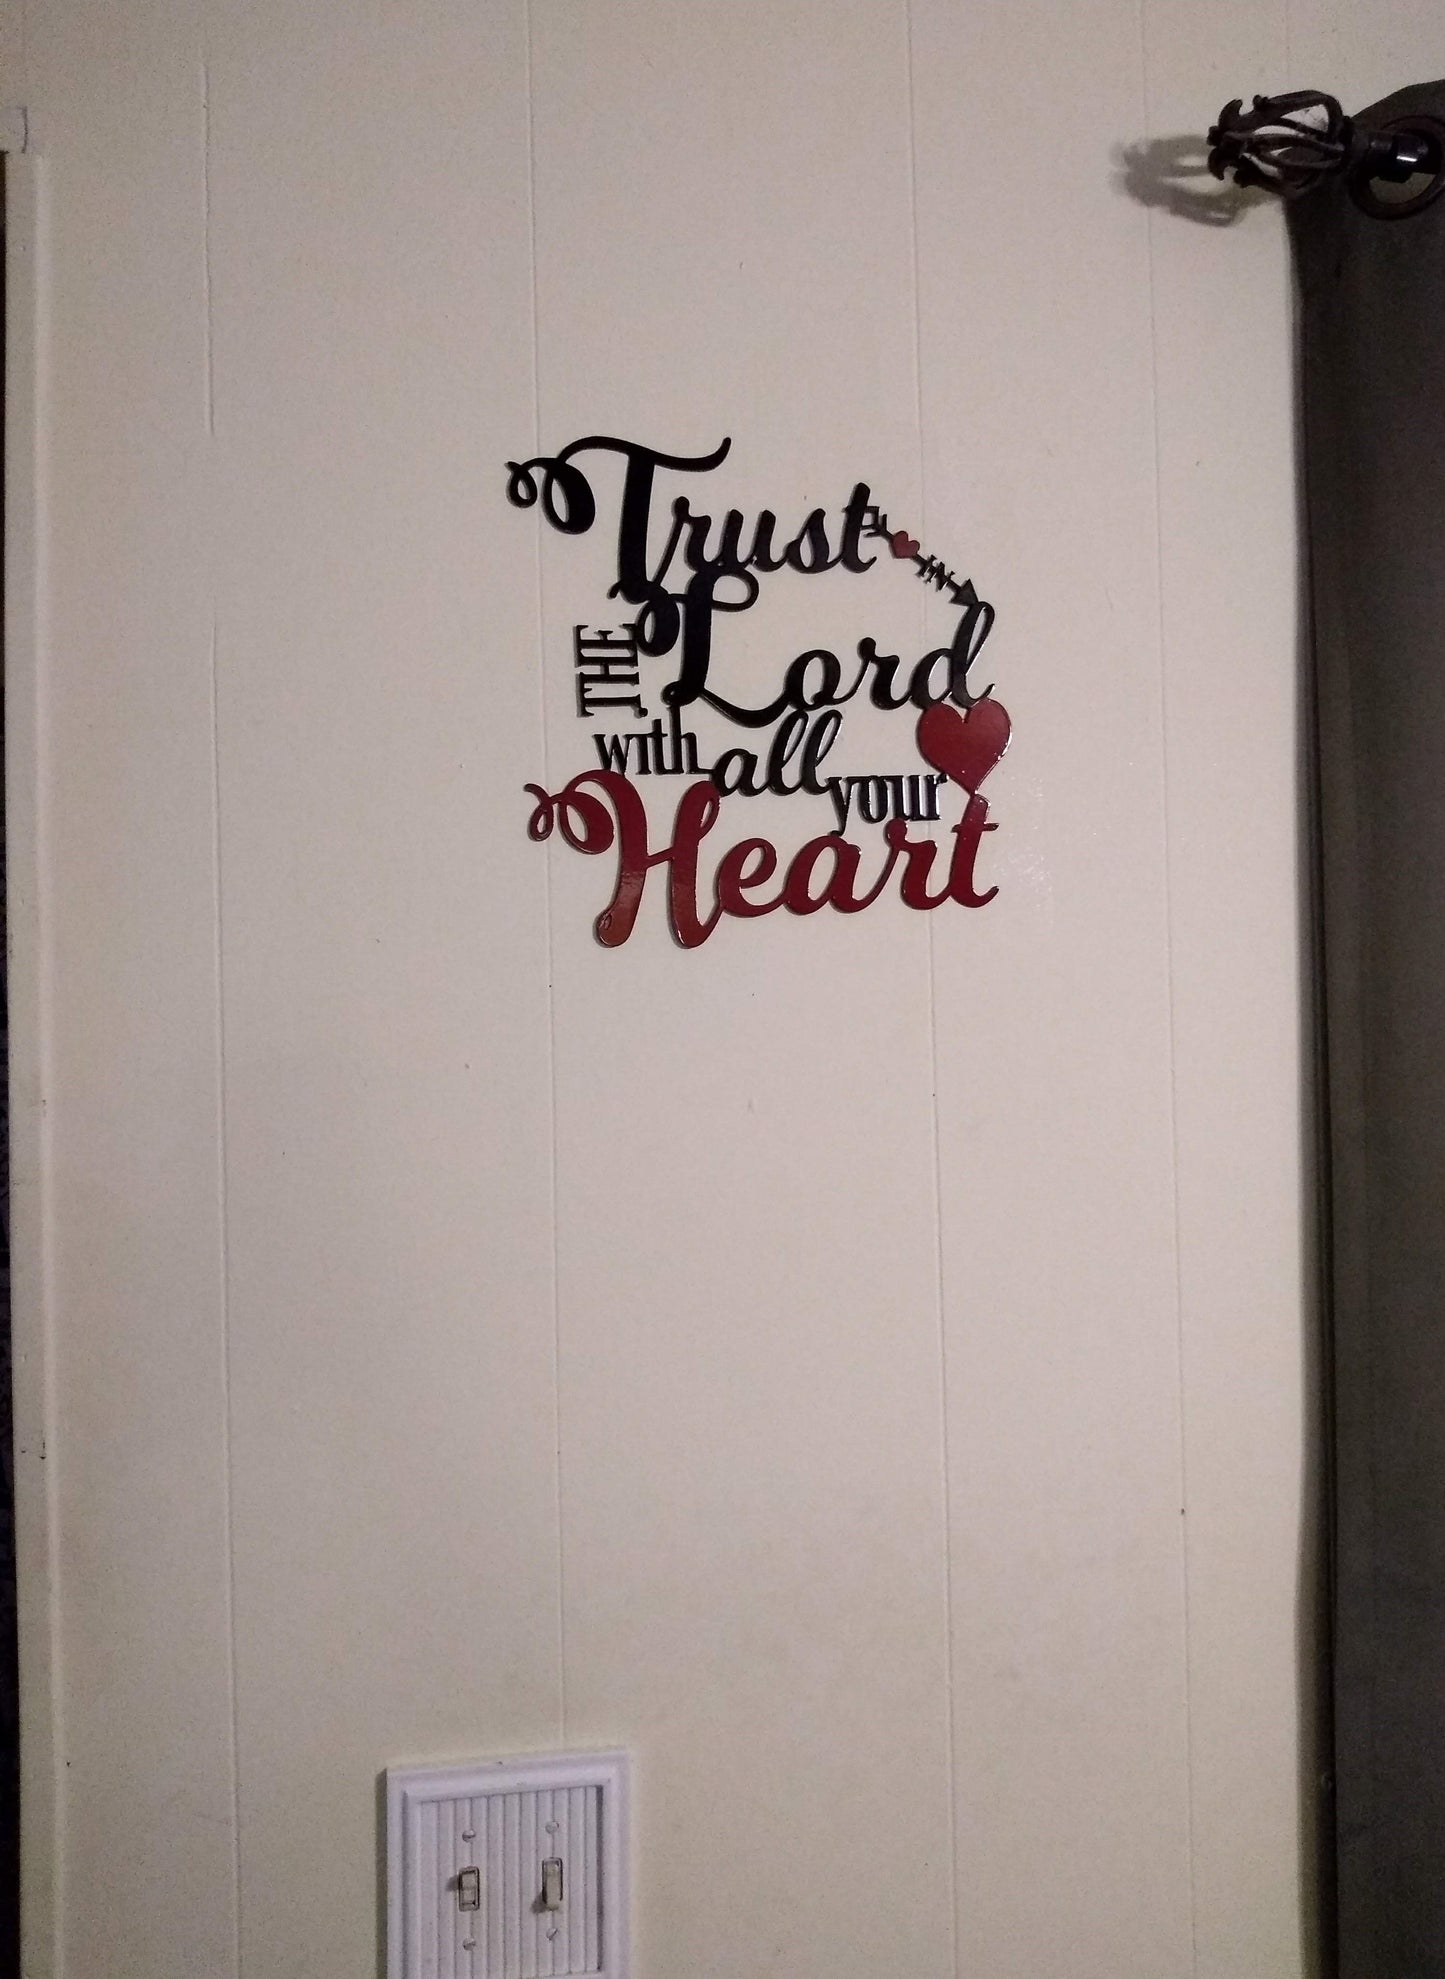 Trust in the Lord with all Your Heart sign